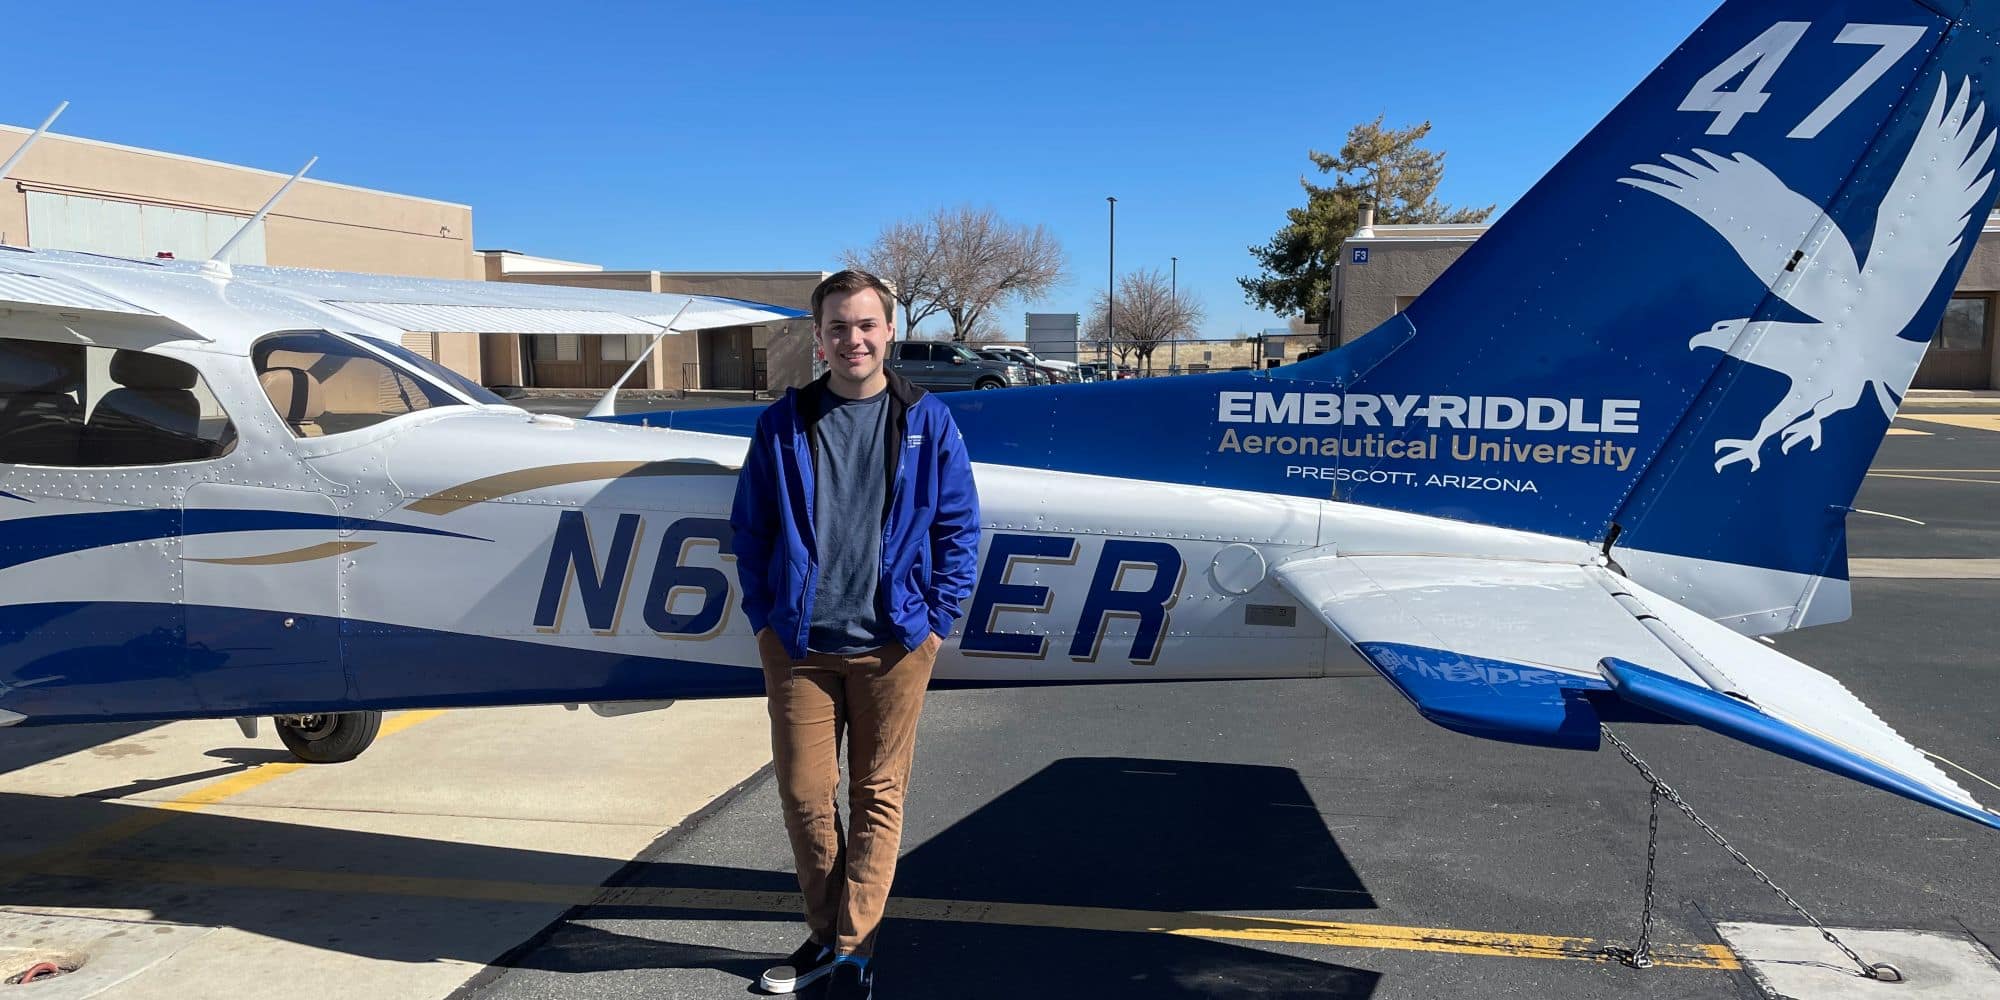 Aeronautical Science major Michael Bouchard ('22) stands beside a plane on the Embry-Riddle Flight Line. (Photo: Michael Bouchard / Embry-Riddle)